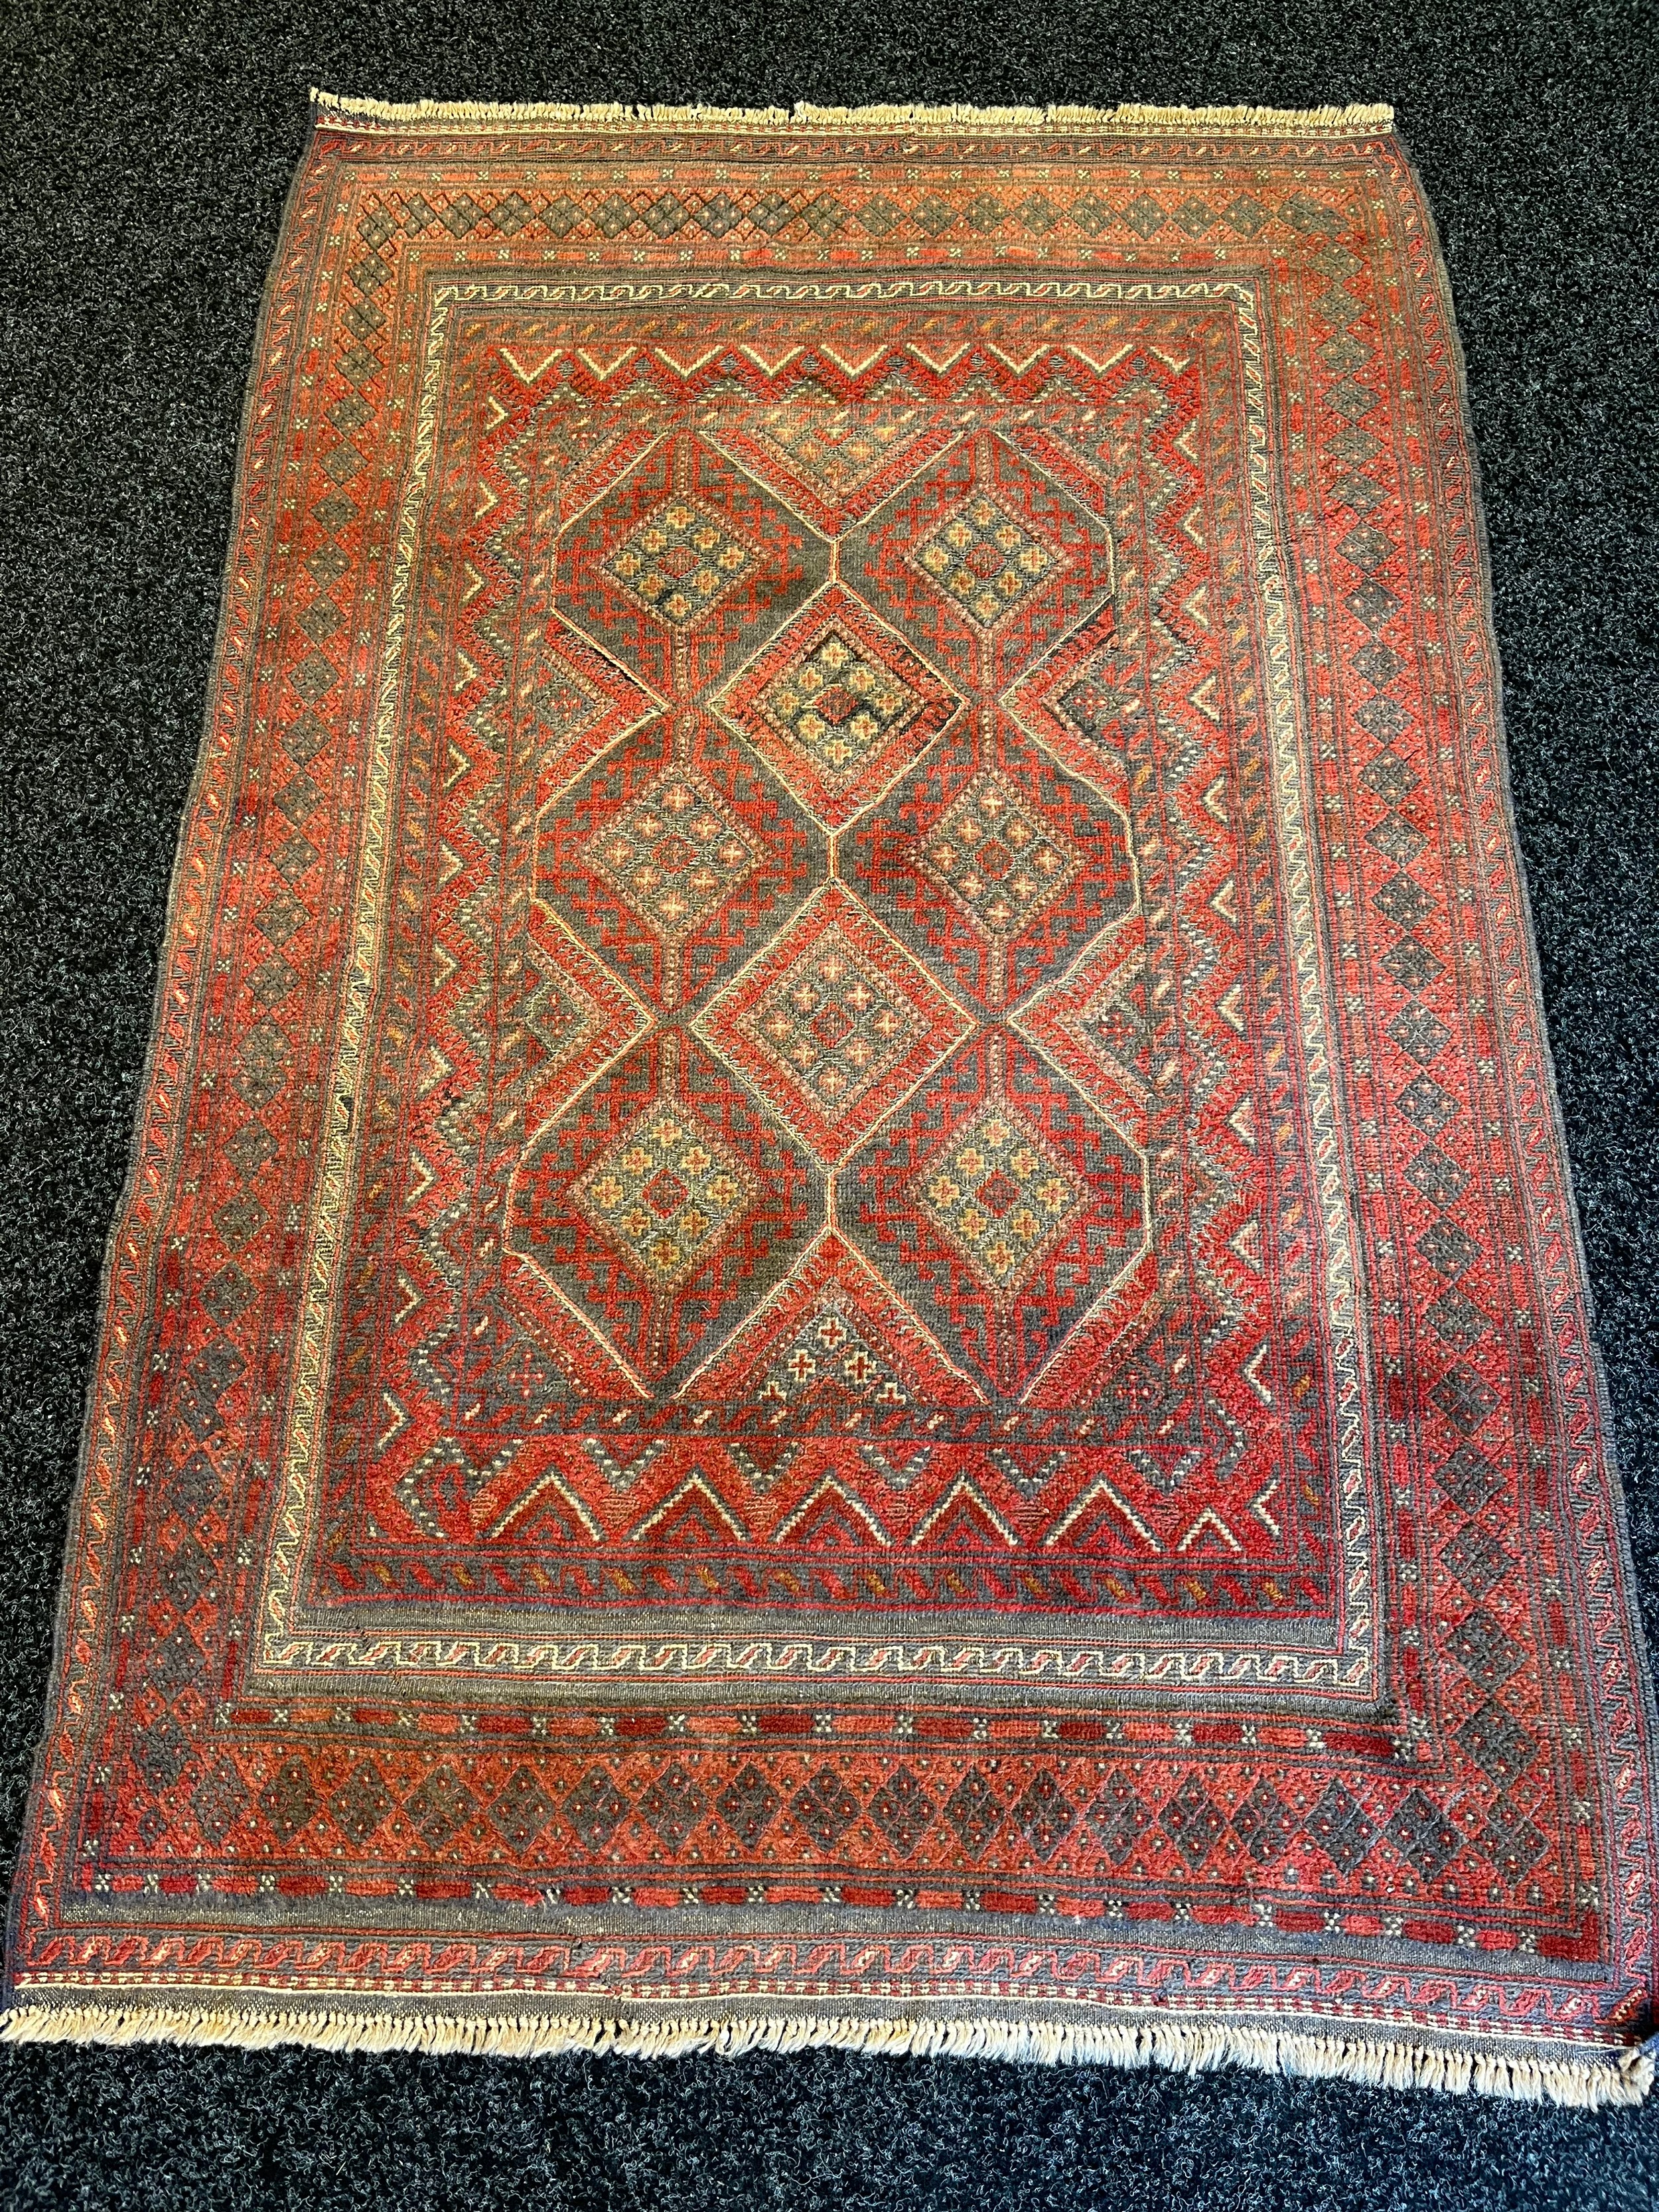 Antique handmade kilm rug, comes with certificate of authenticity [194x121cm]